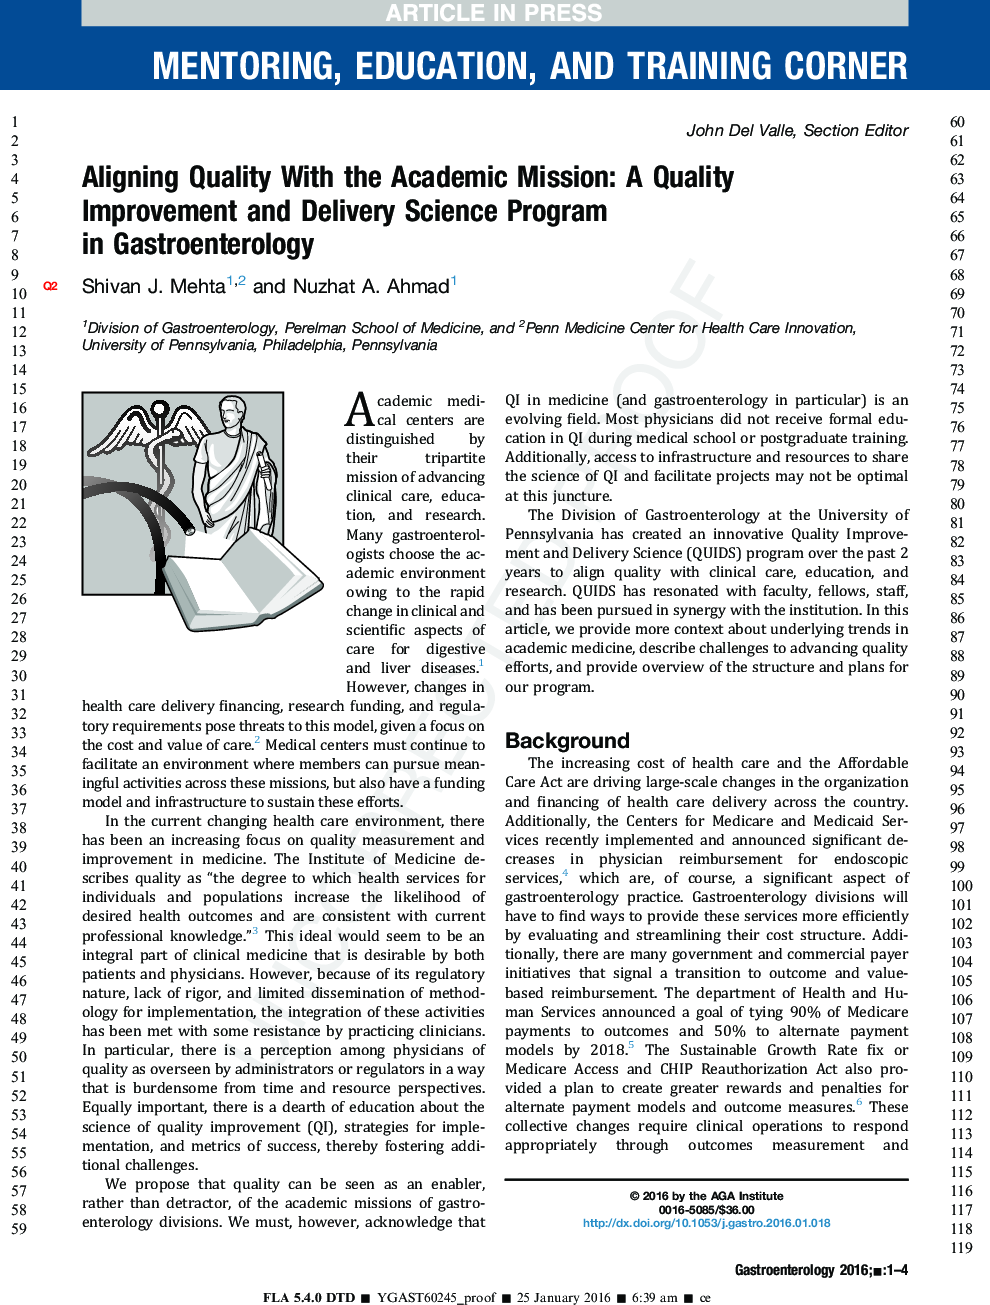 Aligning Quality With the Academic Mission: A Quality Improvement and Delivery Science Program in Gastroenterology